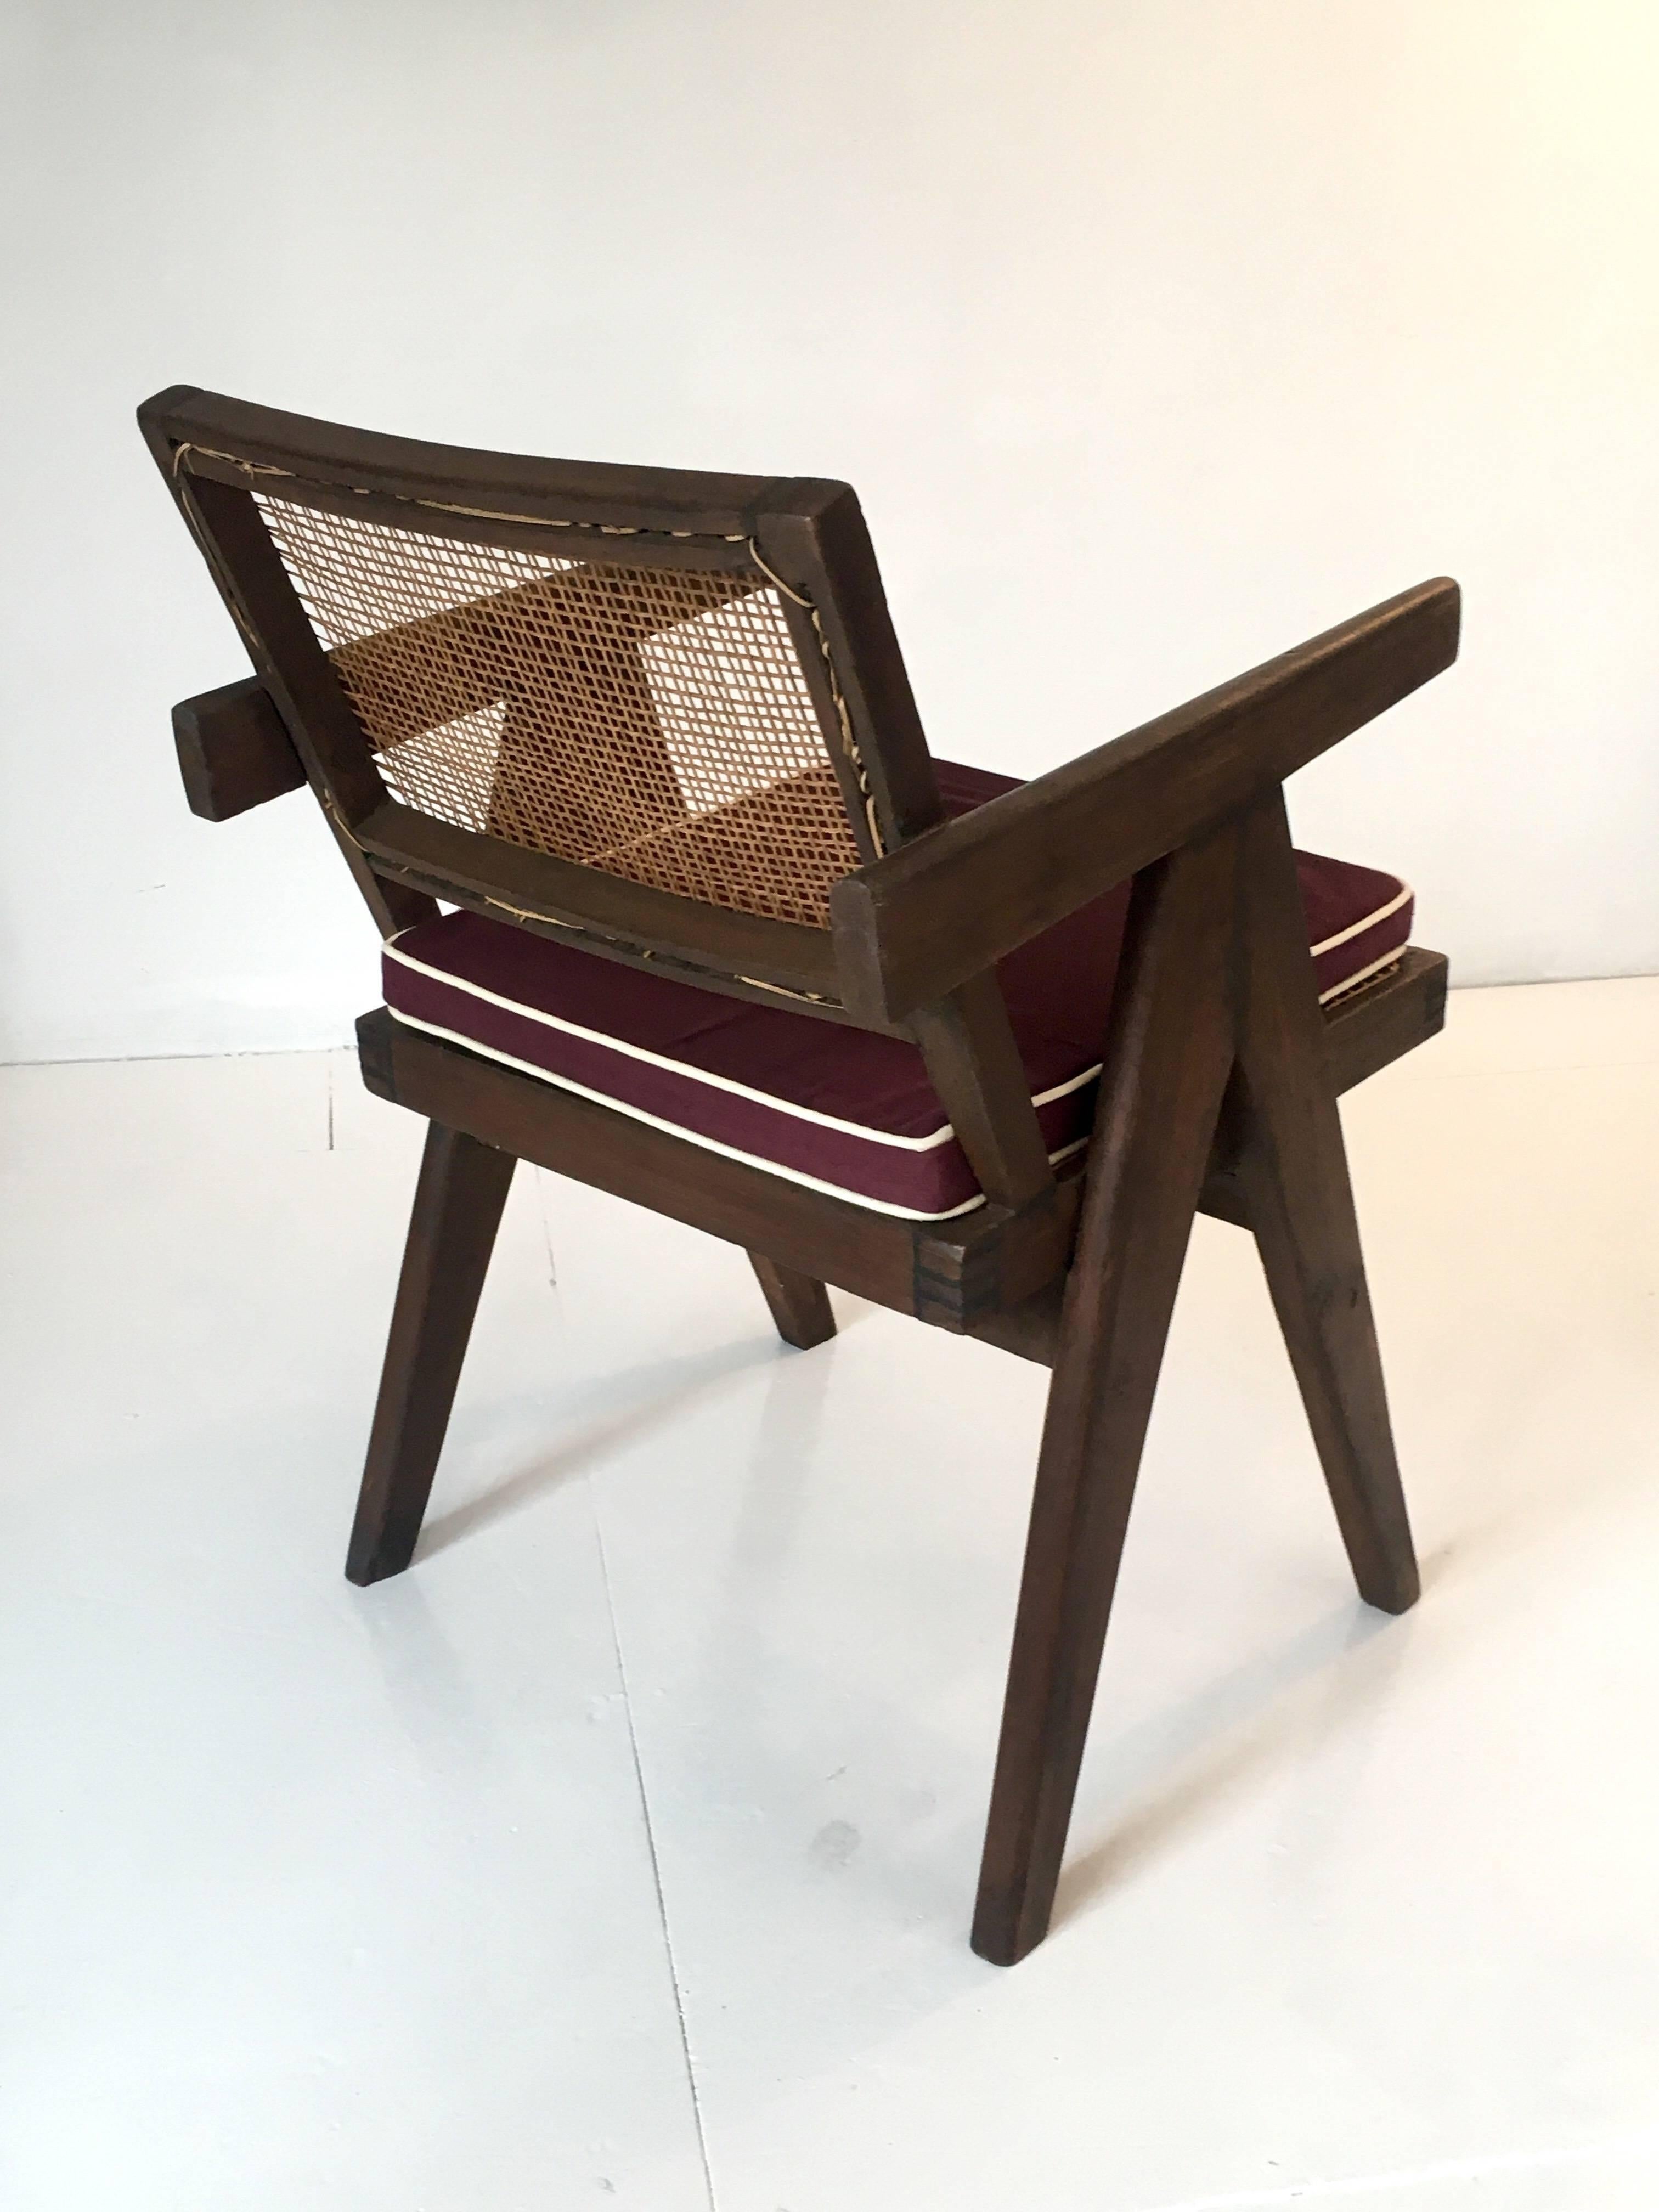 A single armchair called office cane chair by Pierre Jeanneret (1896-1967) from Chandigarh.
In teak with cushion and with bended and slightly curved back.
Cane seat and back, circa 1956.
This example has been restored with a wax finish.
Signs of use